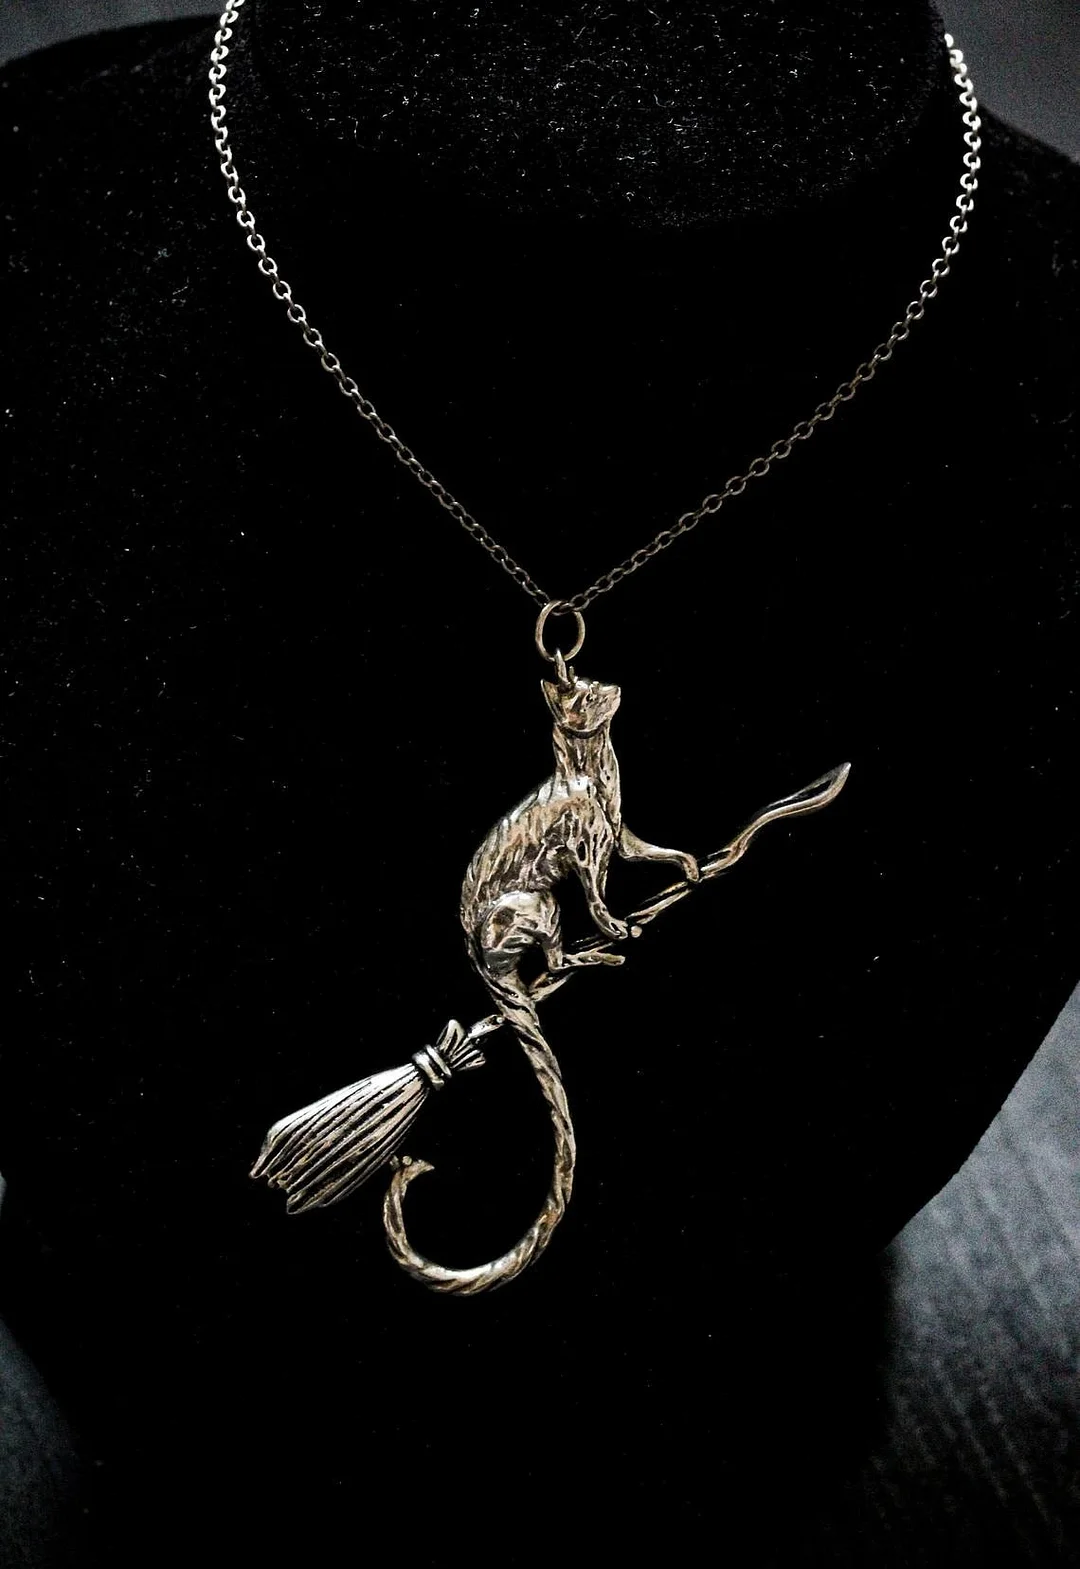 Cifeeo Cat on A Broomstick, Witches' Pagan Wiccan Witchcraft, Stunning Gift Wiccan Jewelry Halloween Gift